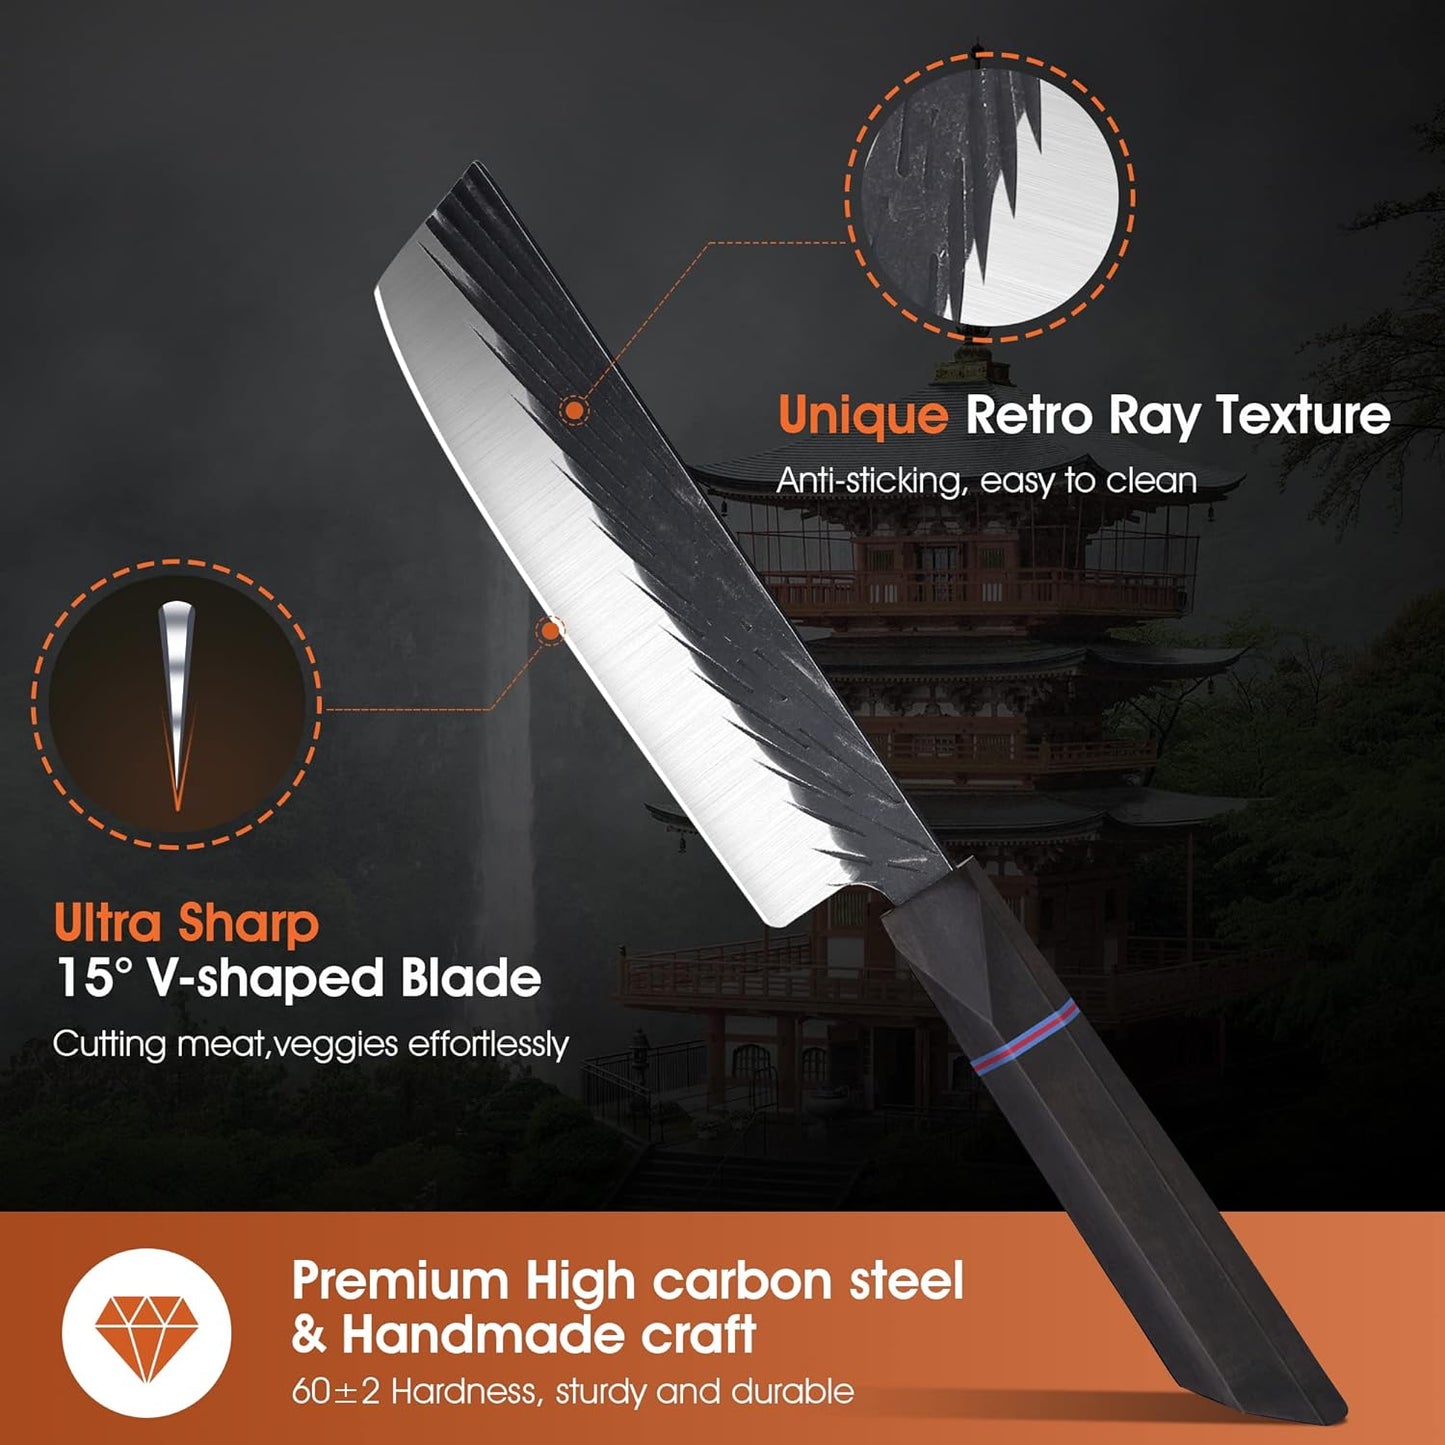 KD Hand Forged Nakiri Chef Knife High Carbon Steel with Gift Box